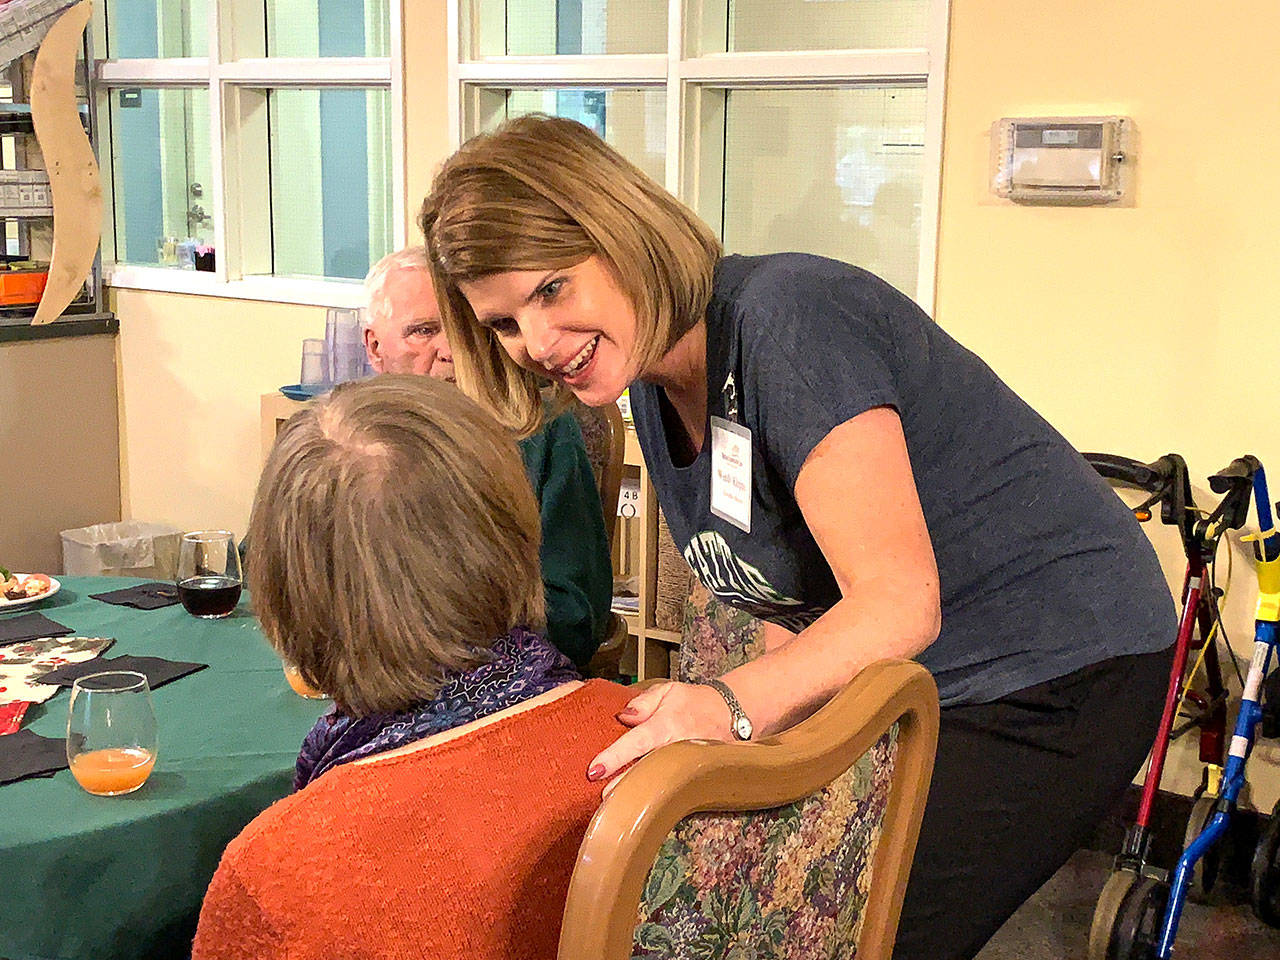 Wendy Kleppe, the new executive director of Vashon Community Care, greets a resident during a reception at the senior living community on Dec. 6. (Kevin Opsahl/Staff Photo)